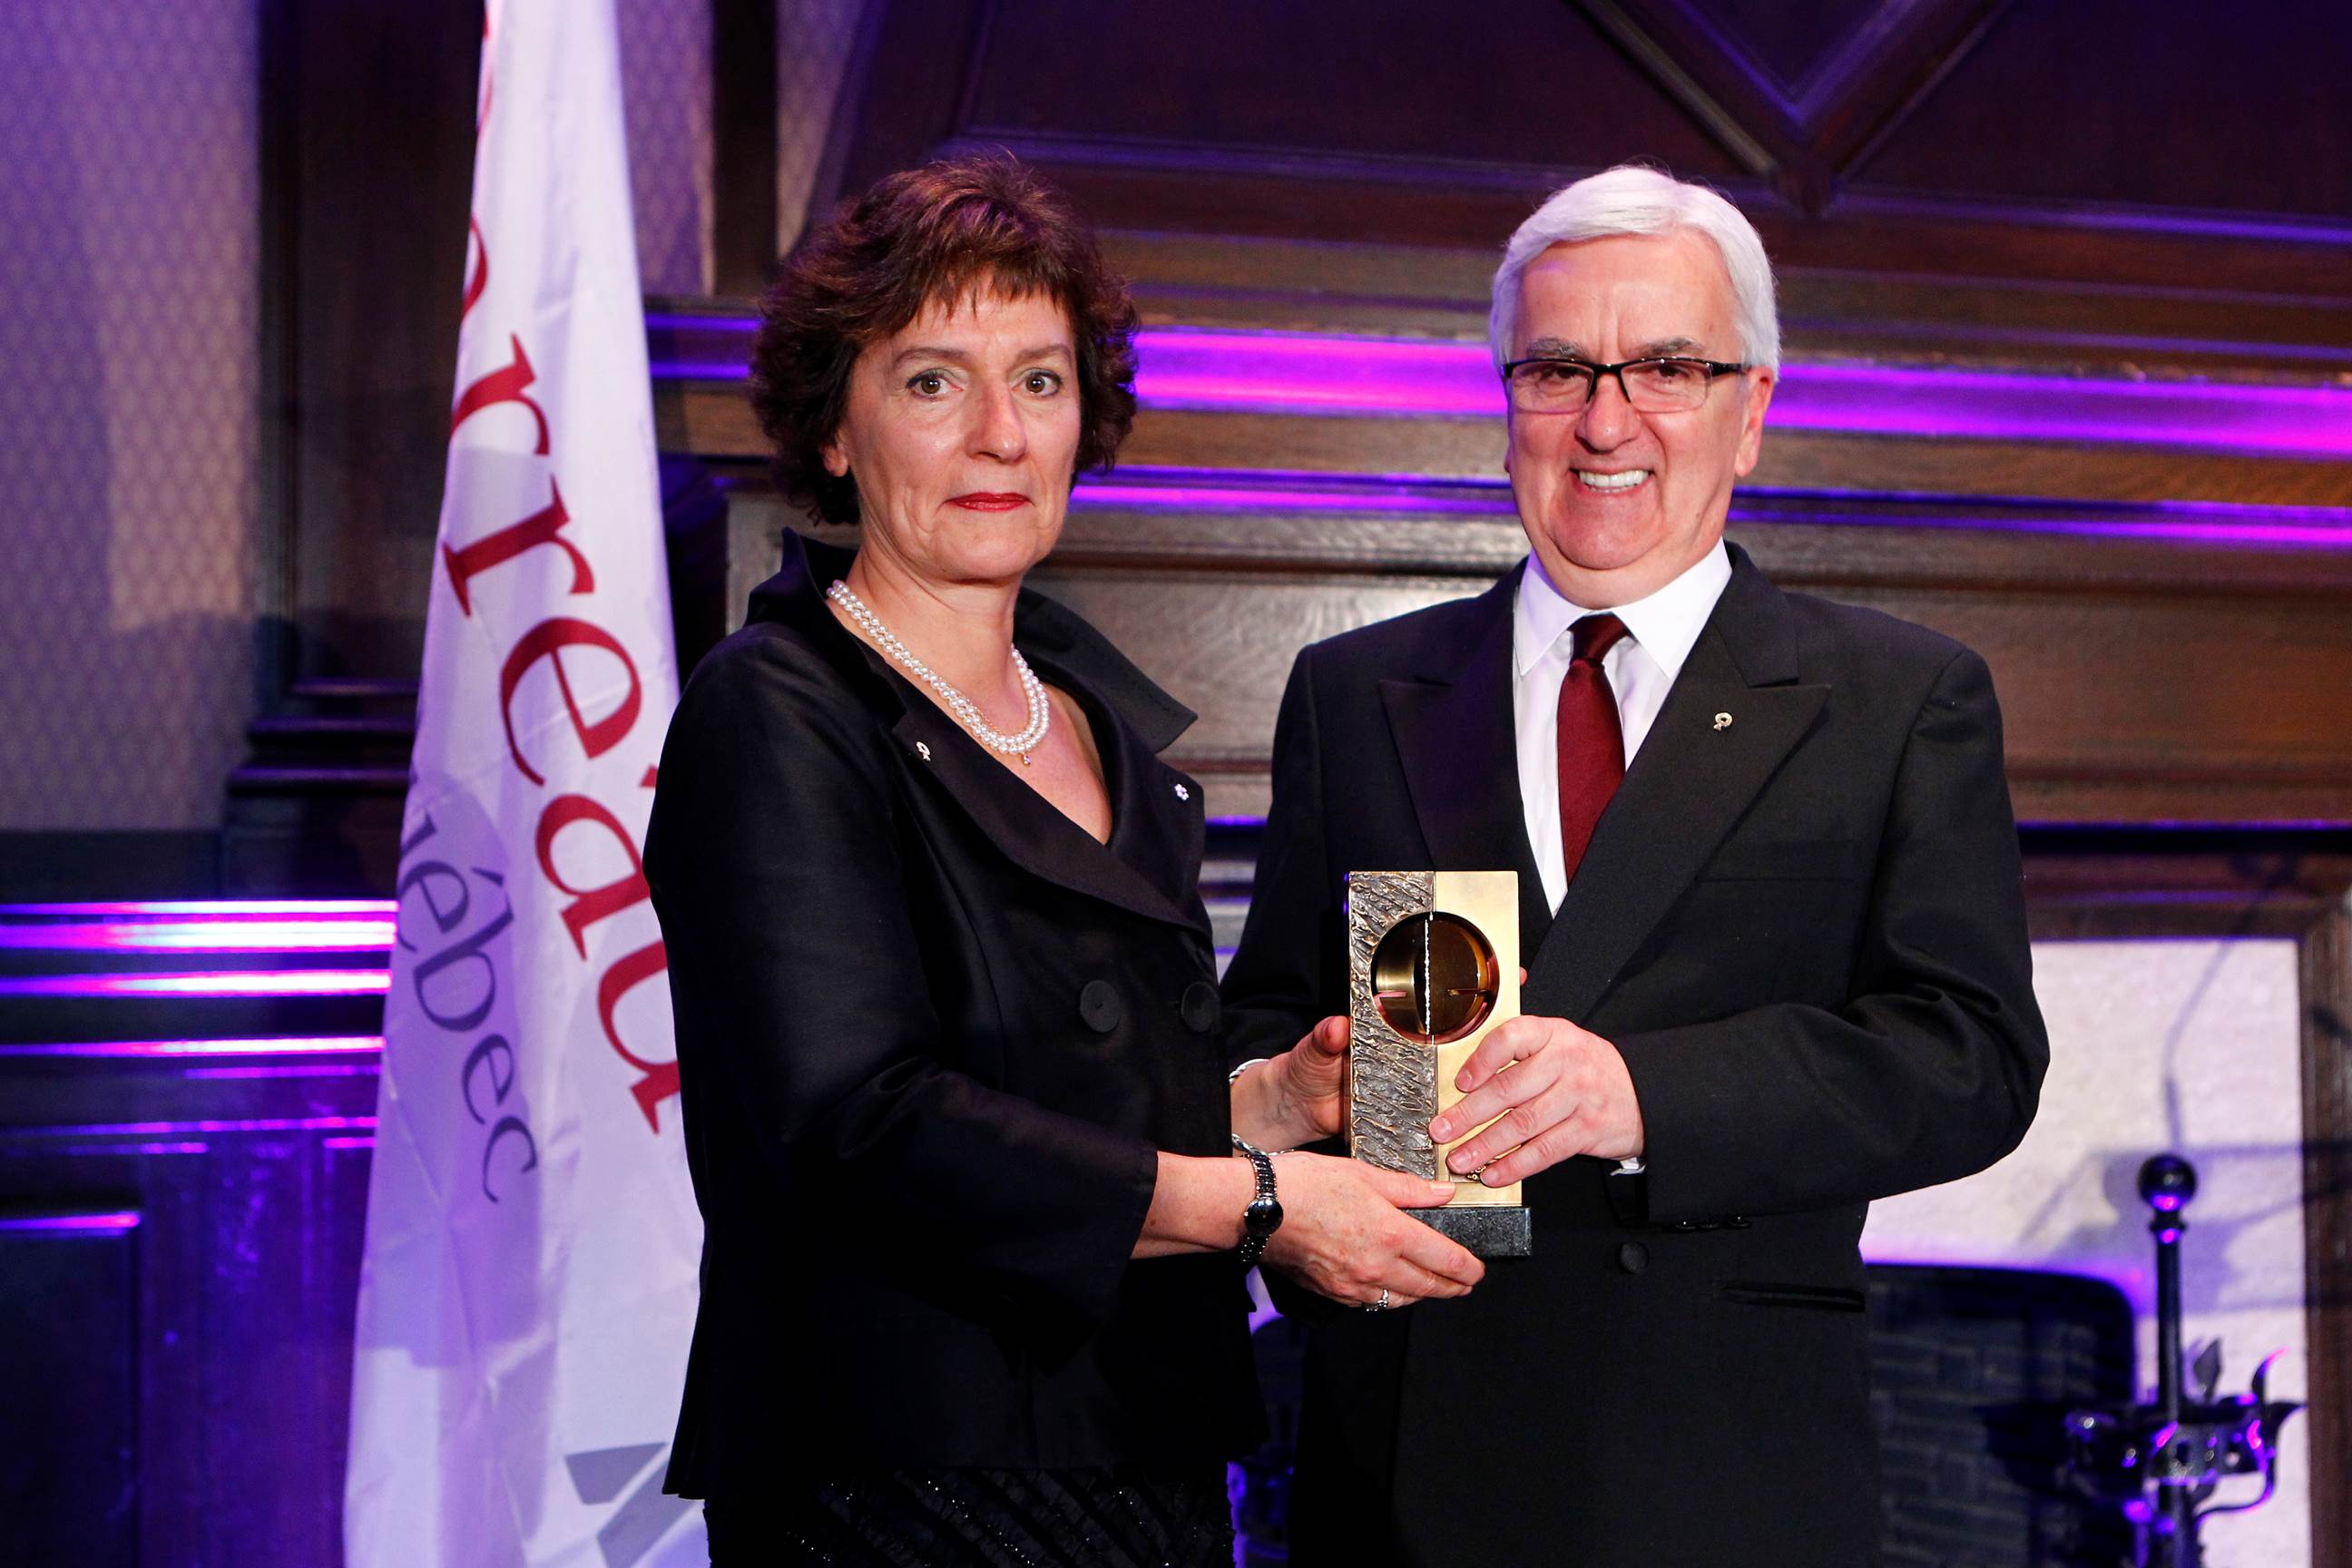 The President of the Barreau du Québec, Louis Masson, presents Senator Renée Dupuis with the Médaille du Barreau in June 2012. As the most prestigious distinction of the Barreau du Québec, it highlights remarkable contributions made by Quebec lawyers in advancing the practice of the law. The award was presented to the senator for her contributions to human rights law, Indigenous rights law and administrative law.